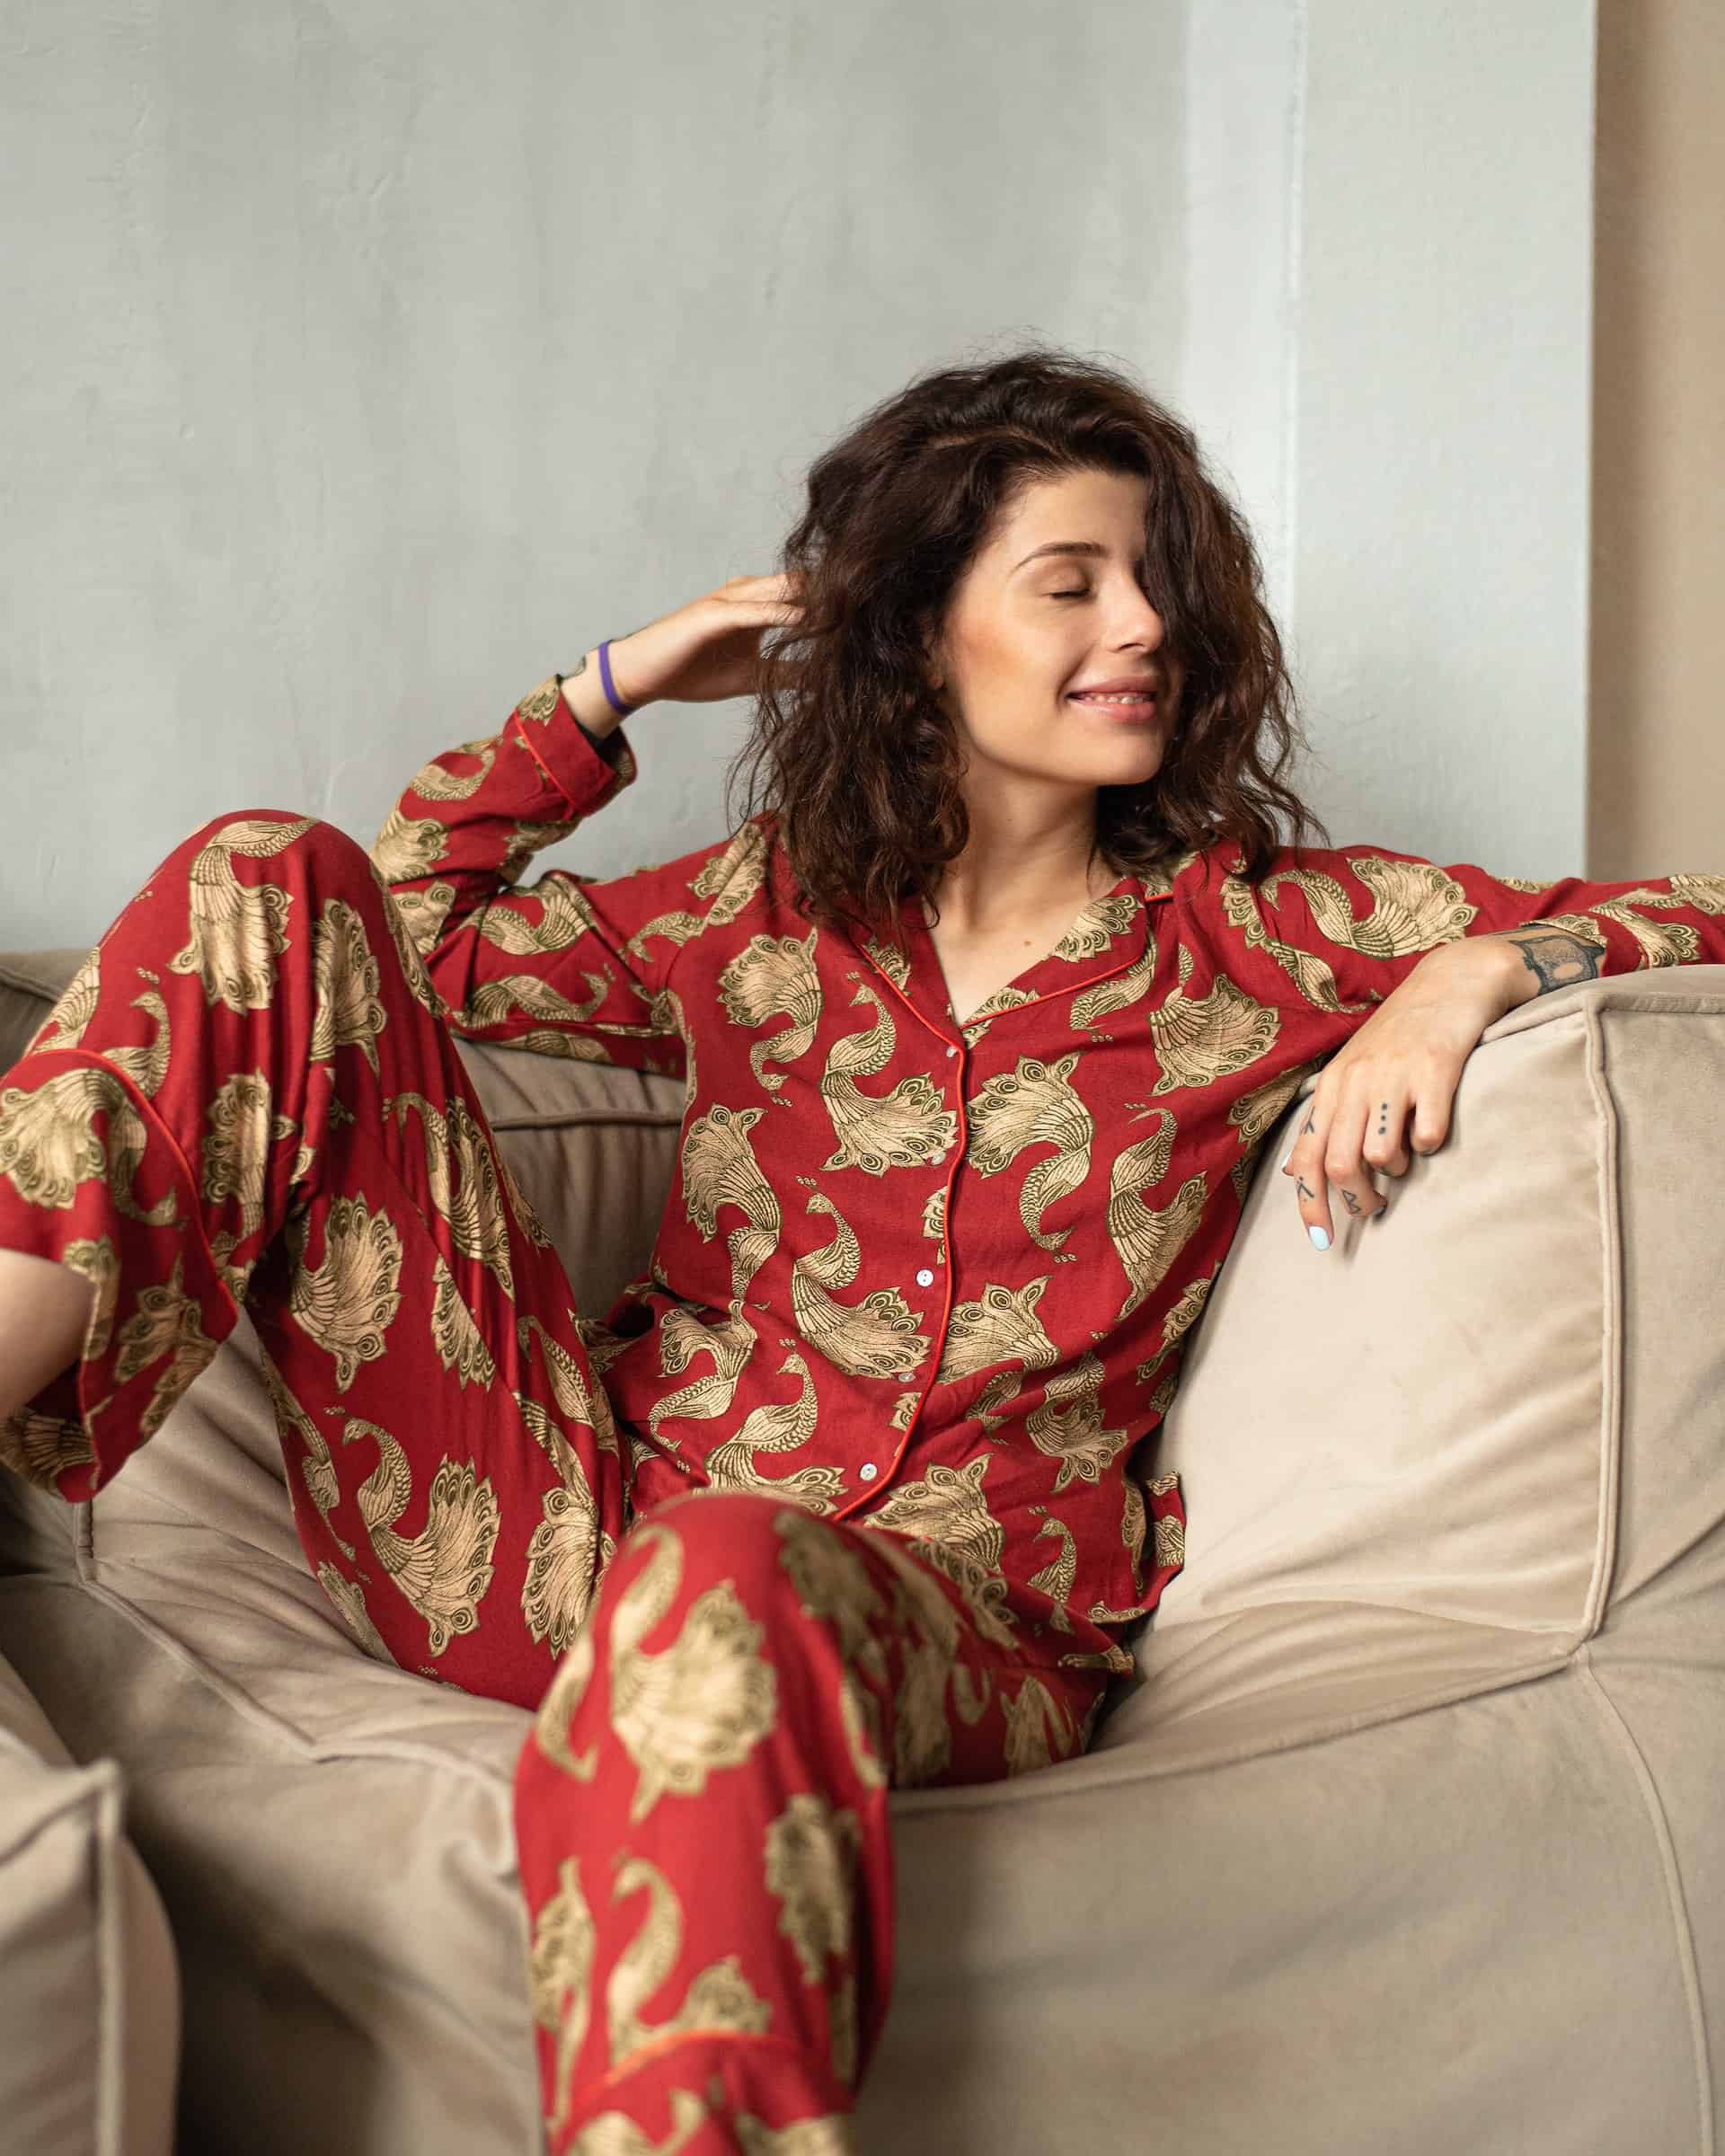 Get Ready for Bed: The Best Sleepwear Sets for Women